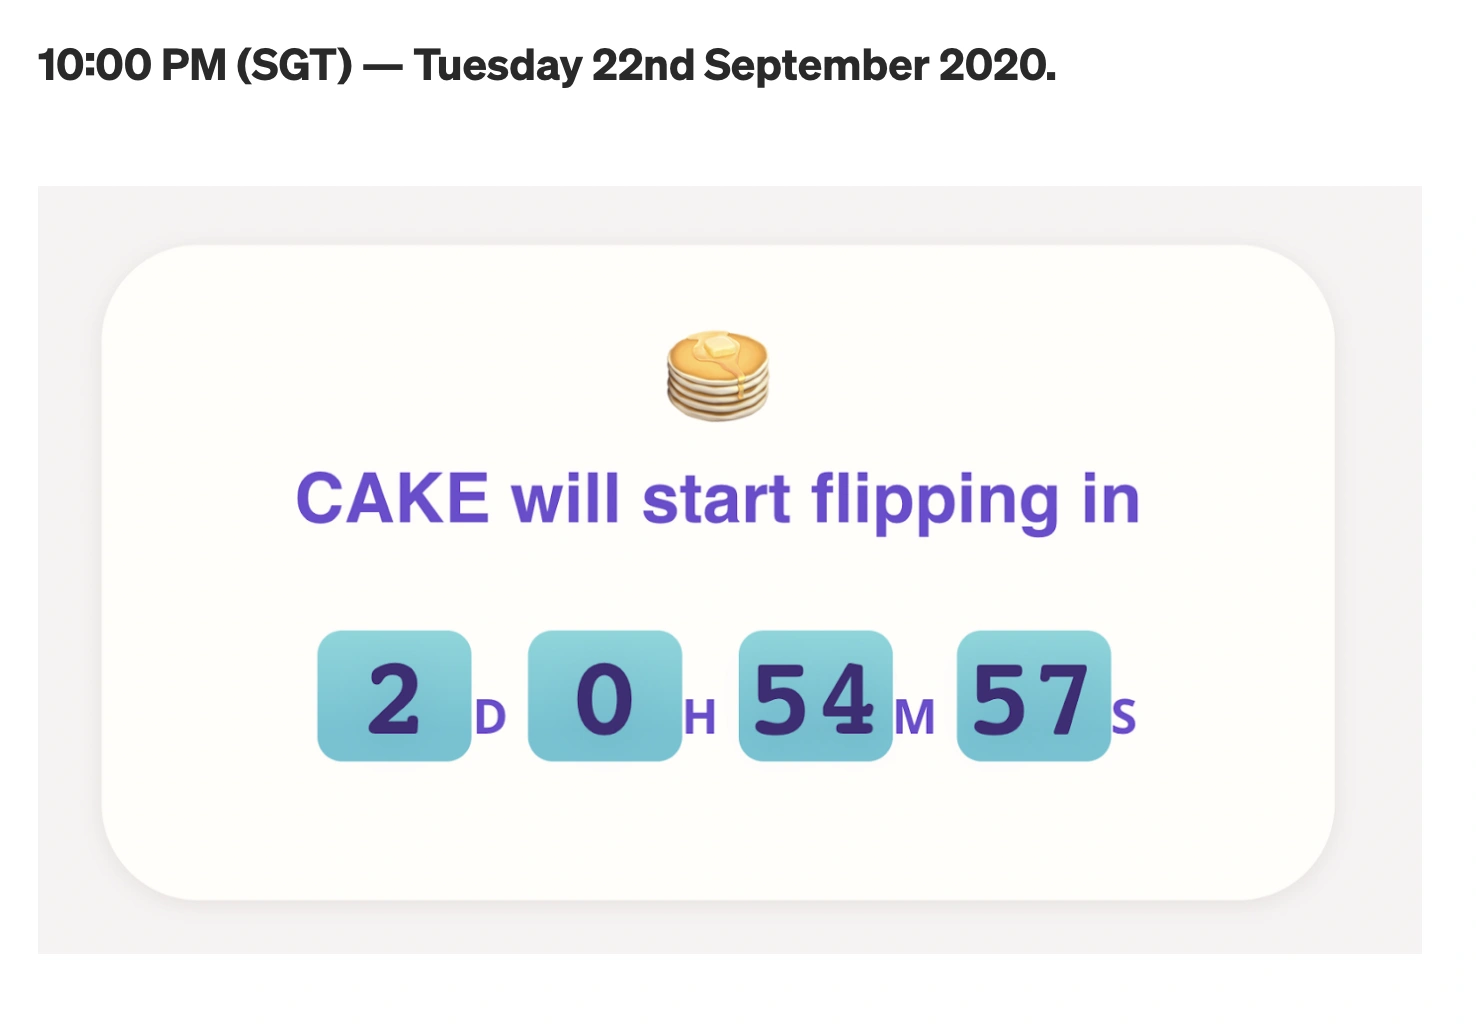 The flipping date of CAKE